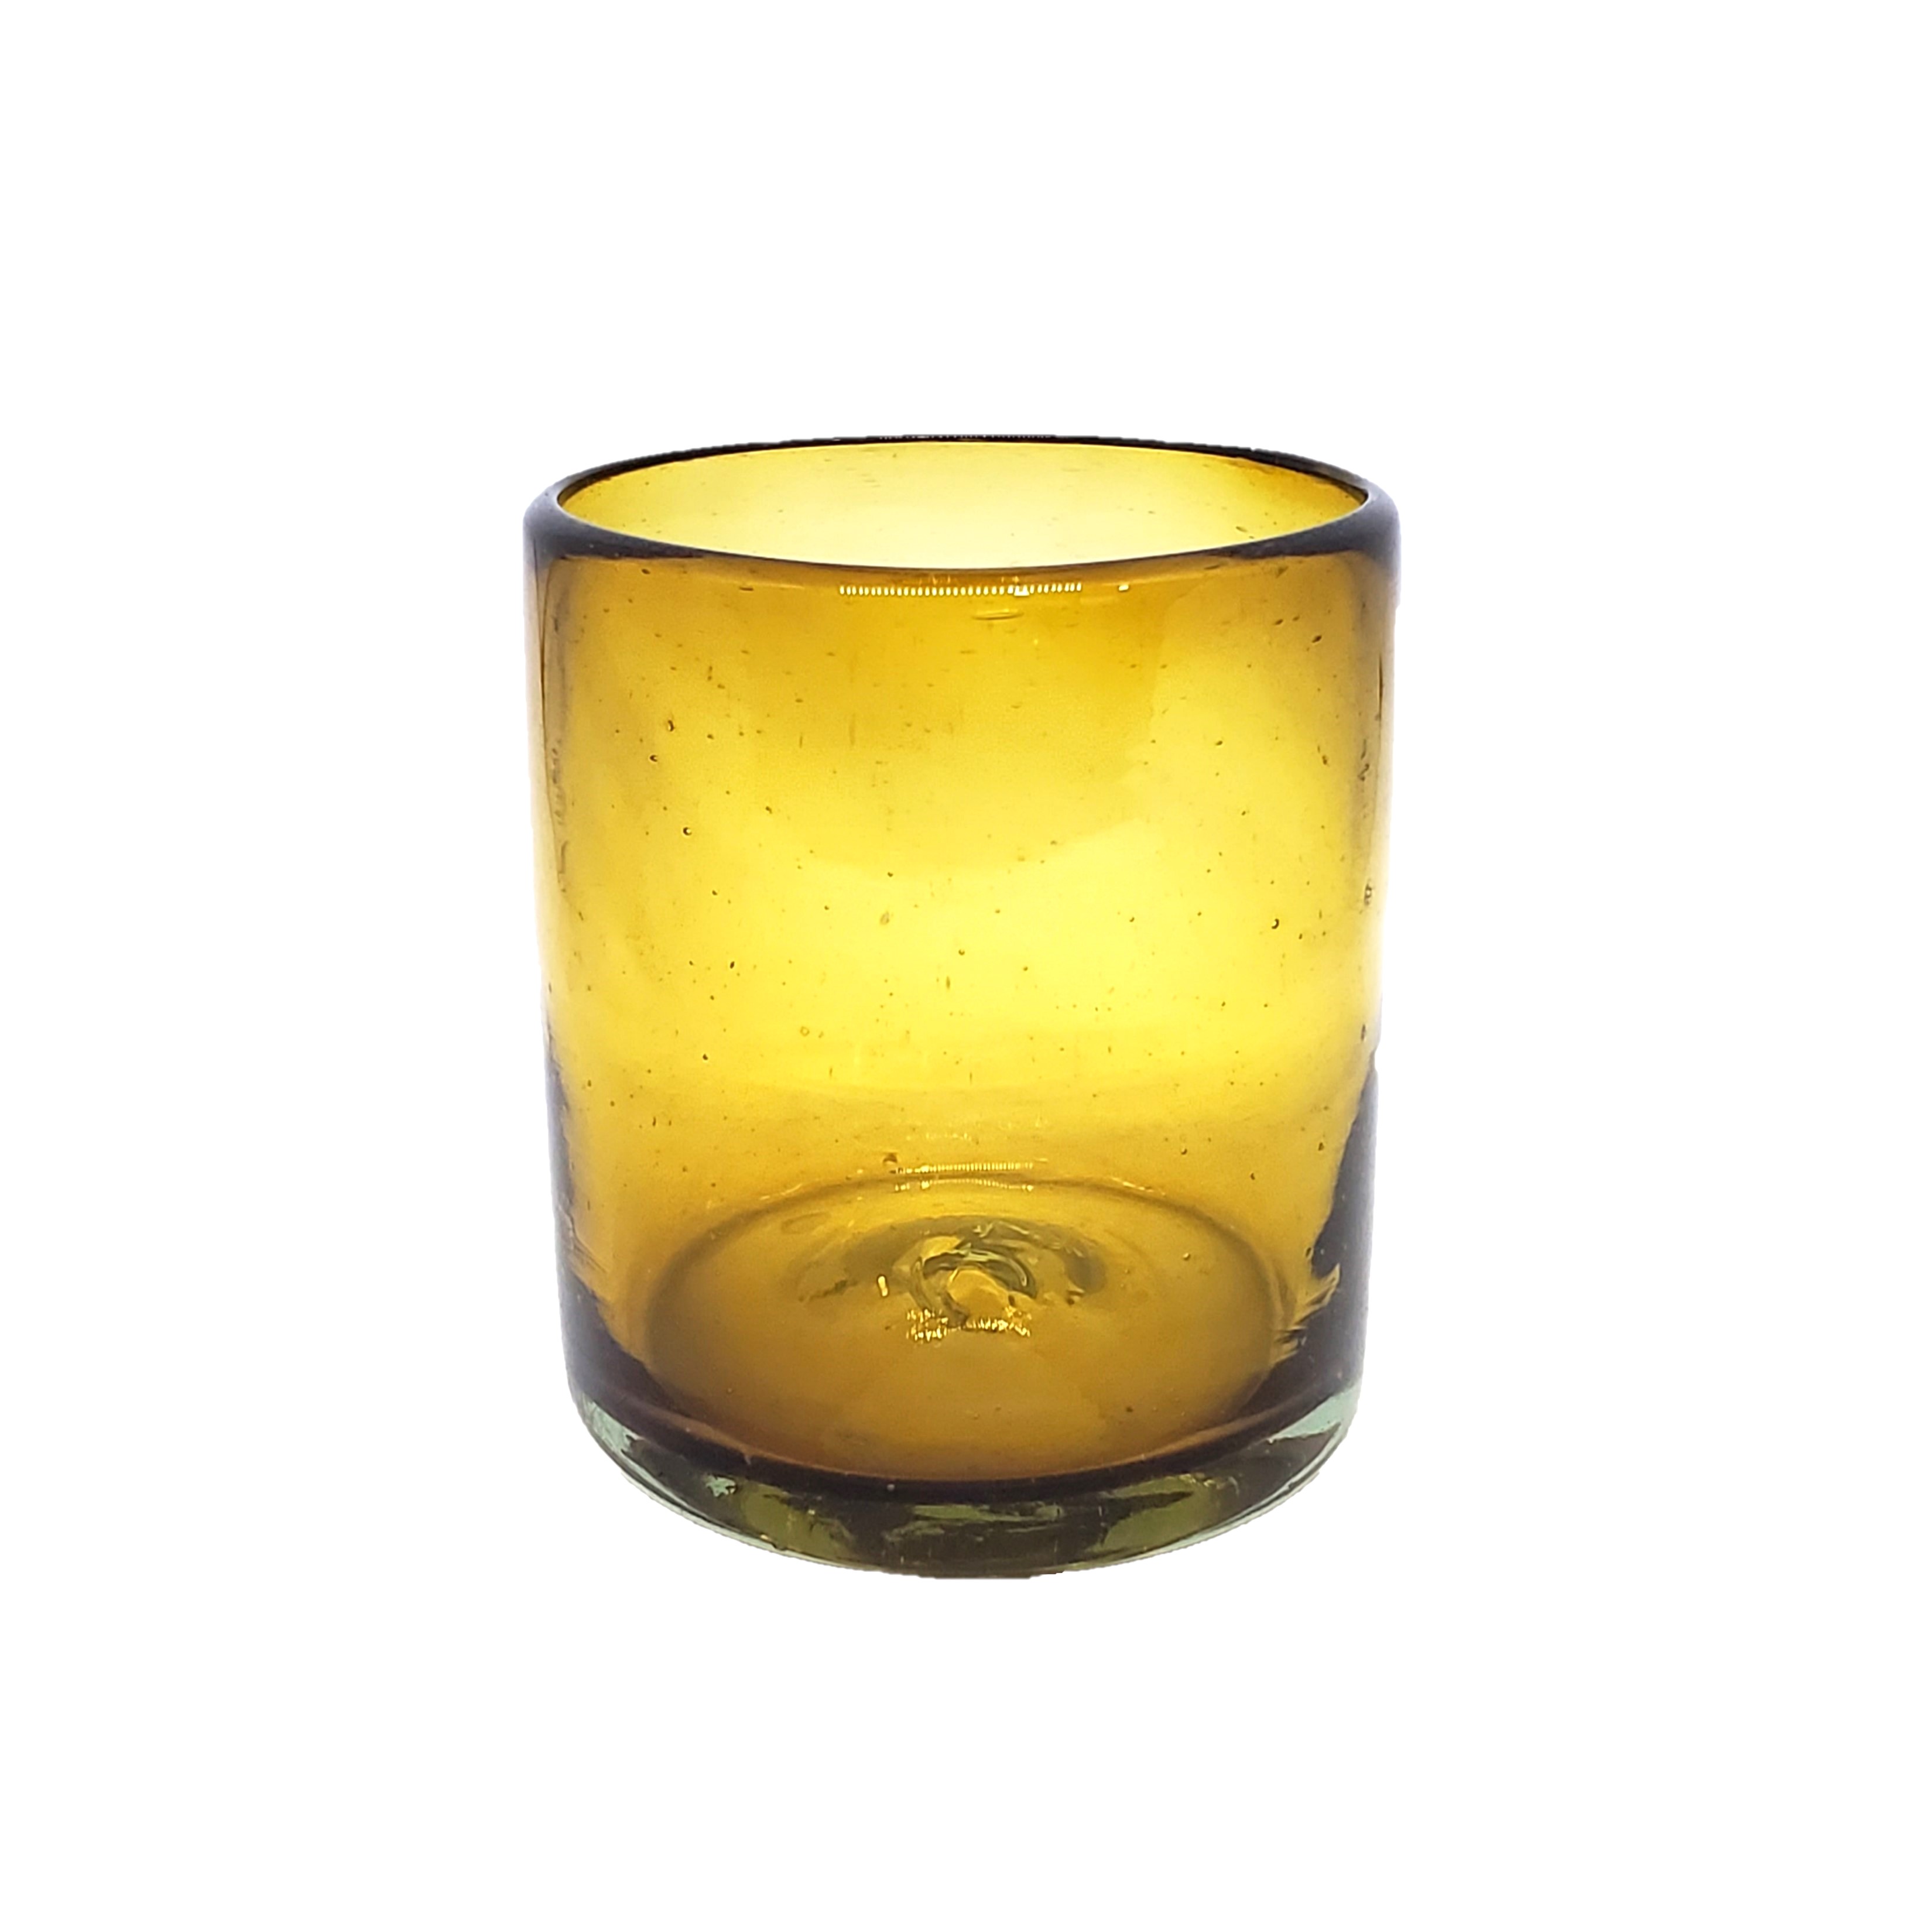 MEXICAN GLASSWARE / Solid Amber 9 oz Short Tumblers (set of 6) / Enhance your favorite drink with these colorful handcrafted glasses.